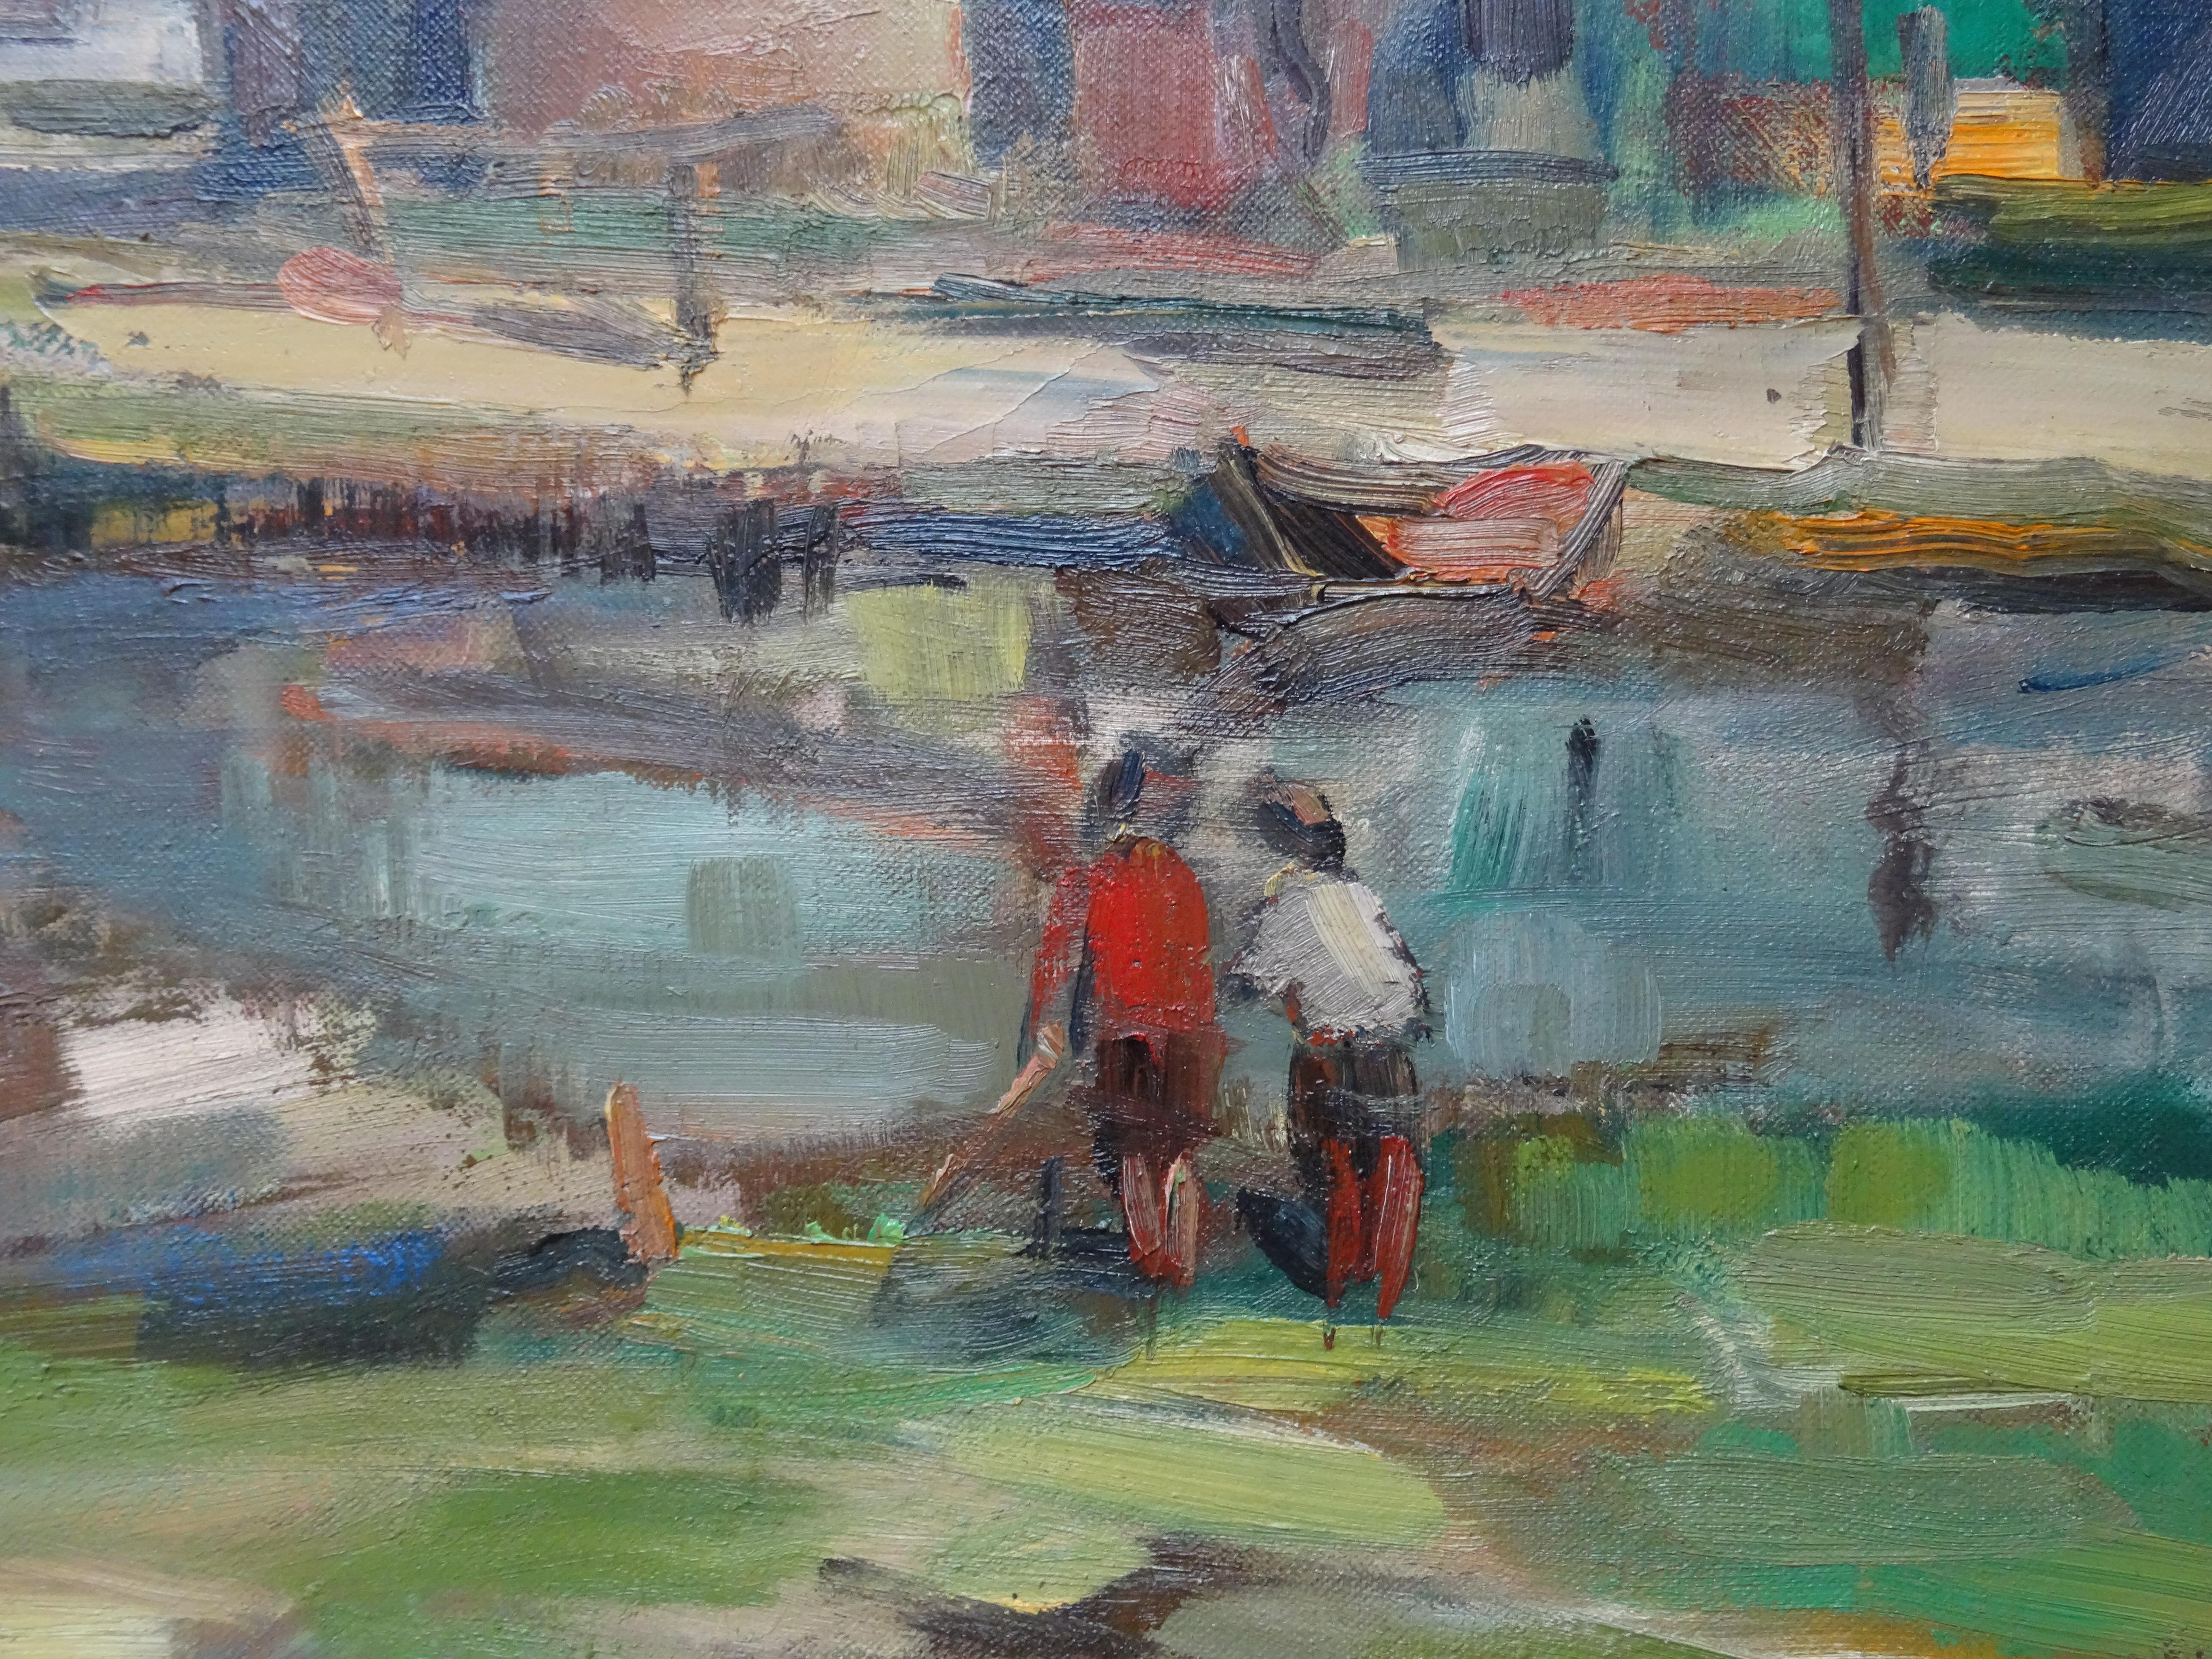 By the river. Canvas, cardboard, oil, 55.5x70.5 cm - Gray Figurative Painting by Janis Rudolfs Zuntaks